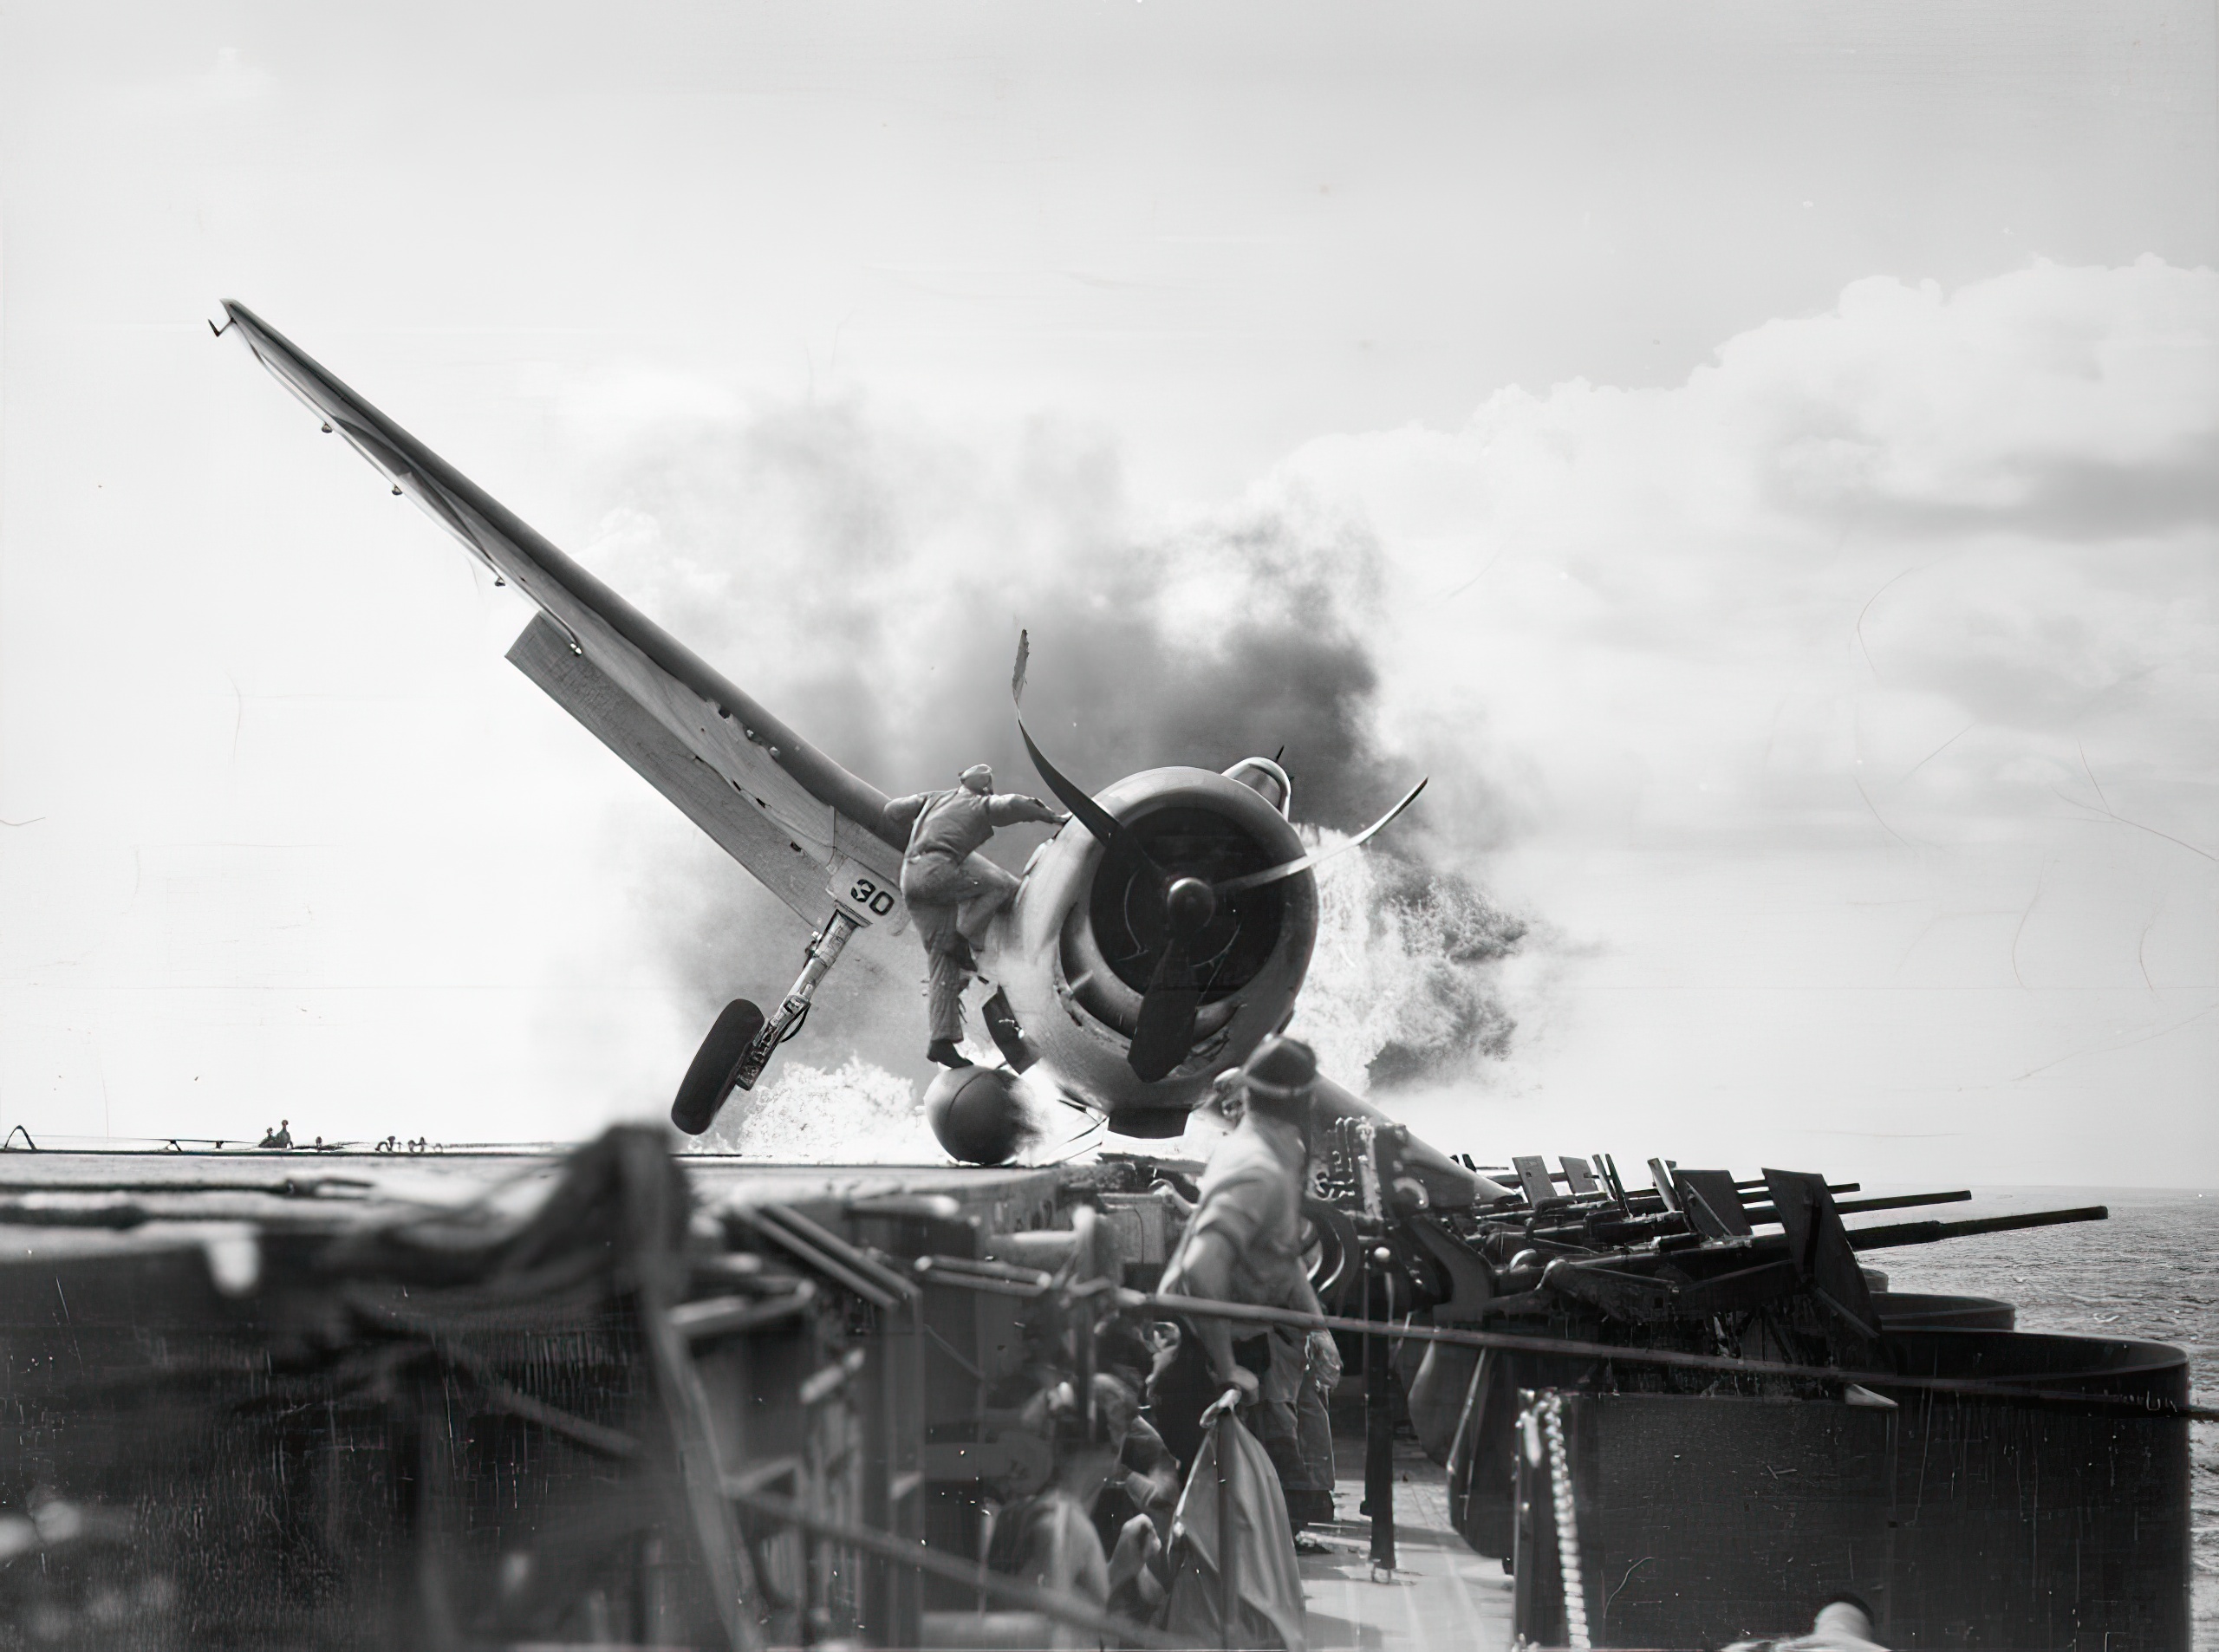 Crash landing of a U.S. Navy Grumman F6F-3 Hellcat (Number 30) of Fighting Squadron 2 (VF-2) aboard the aircraft carrier USS Enterprise (CV-6), into the carrier's port side 20mm gun gallery, November 10 1943